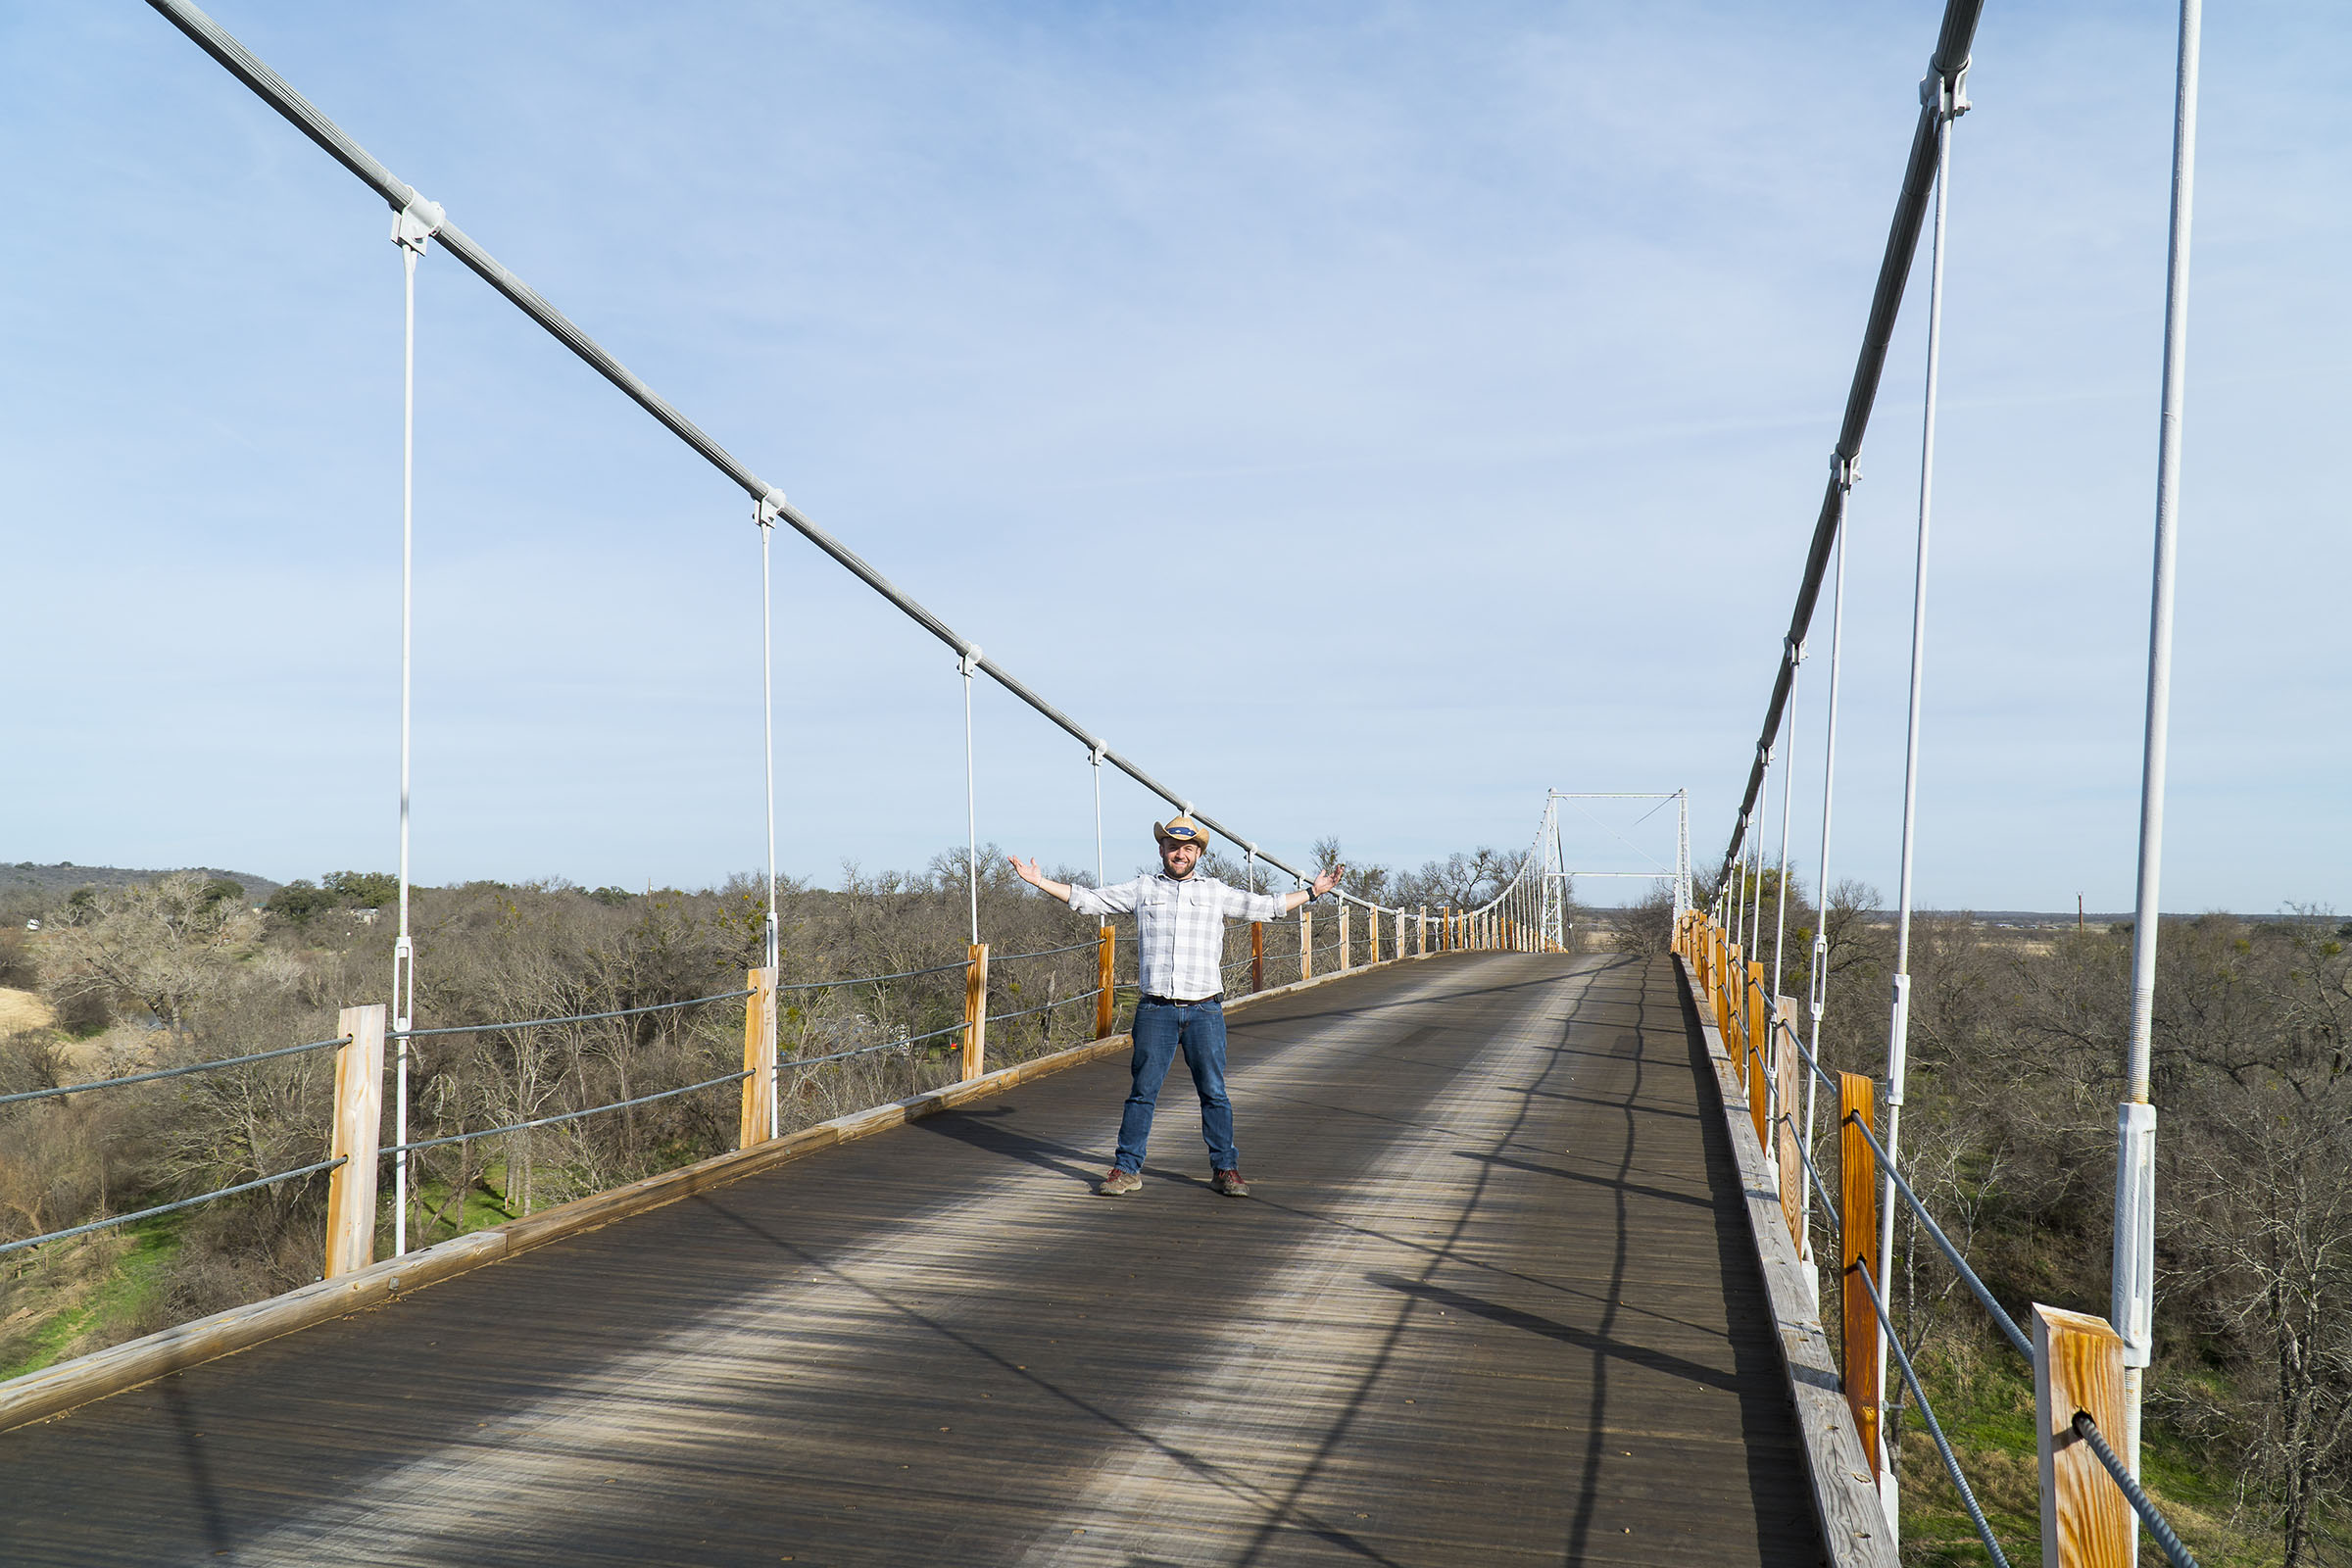 A man in a small cowboy hat stands on a swinging bridge raising his hands